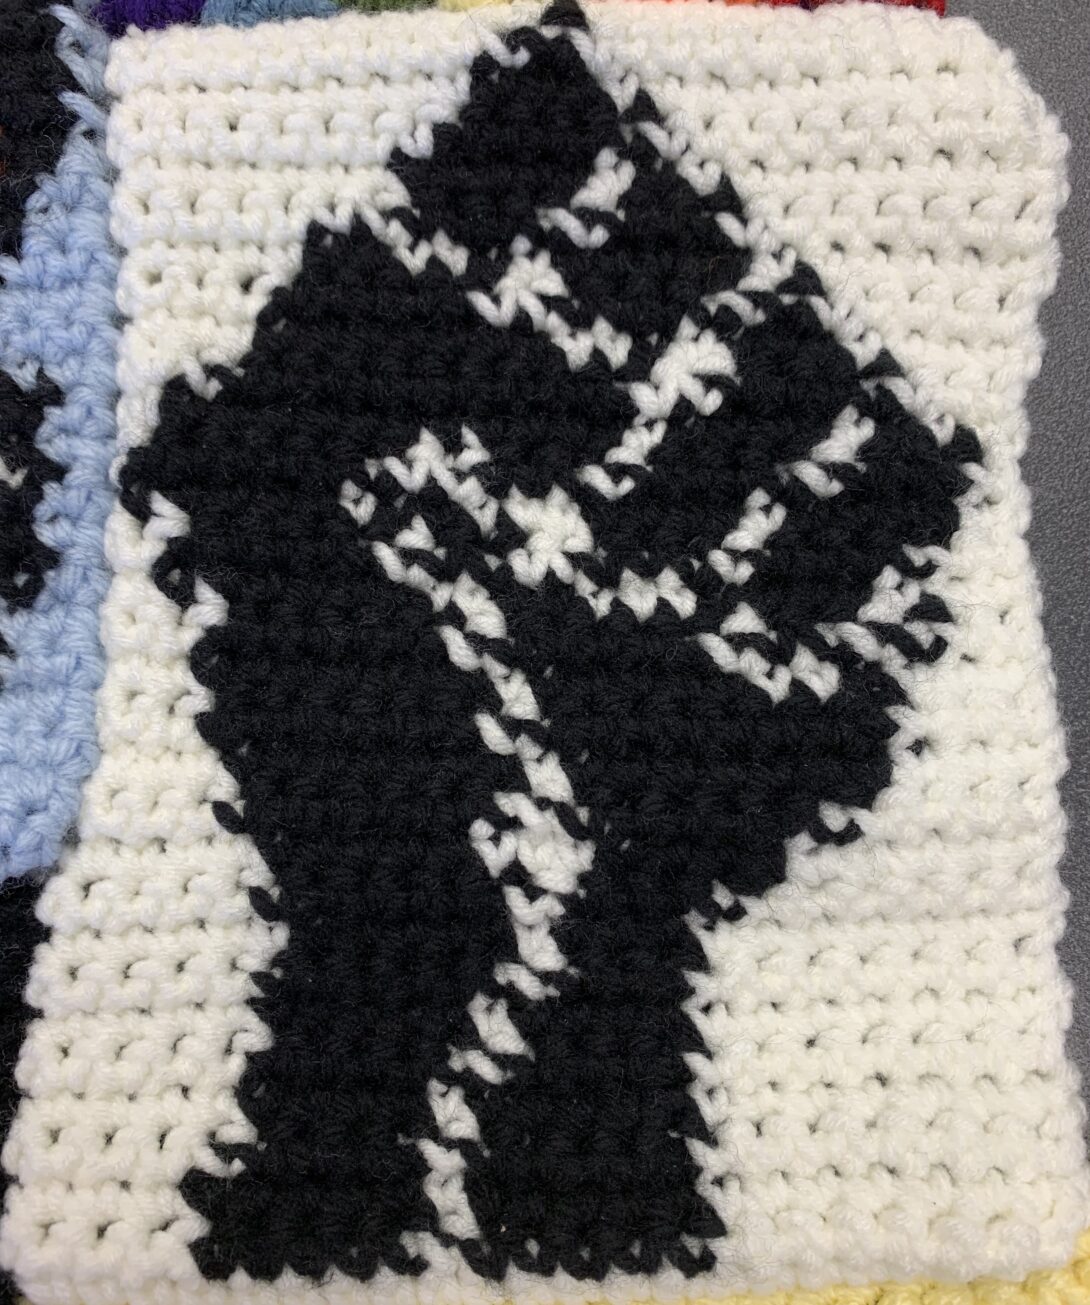 A black fist with white outlines is crocheted in the center of a white crochet square